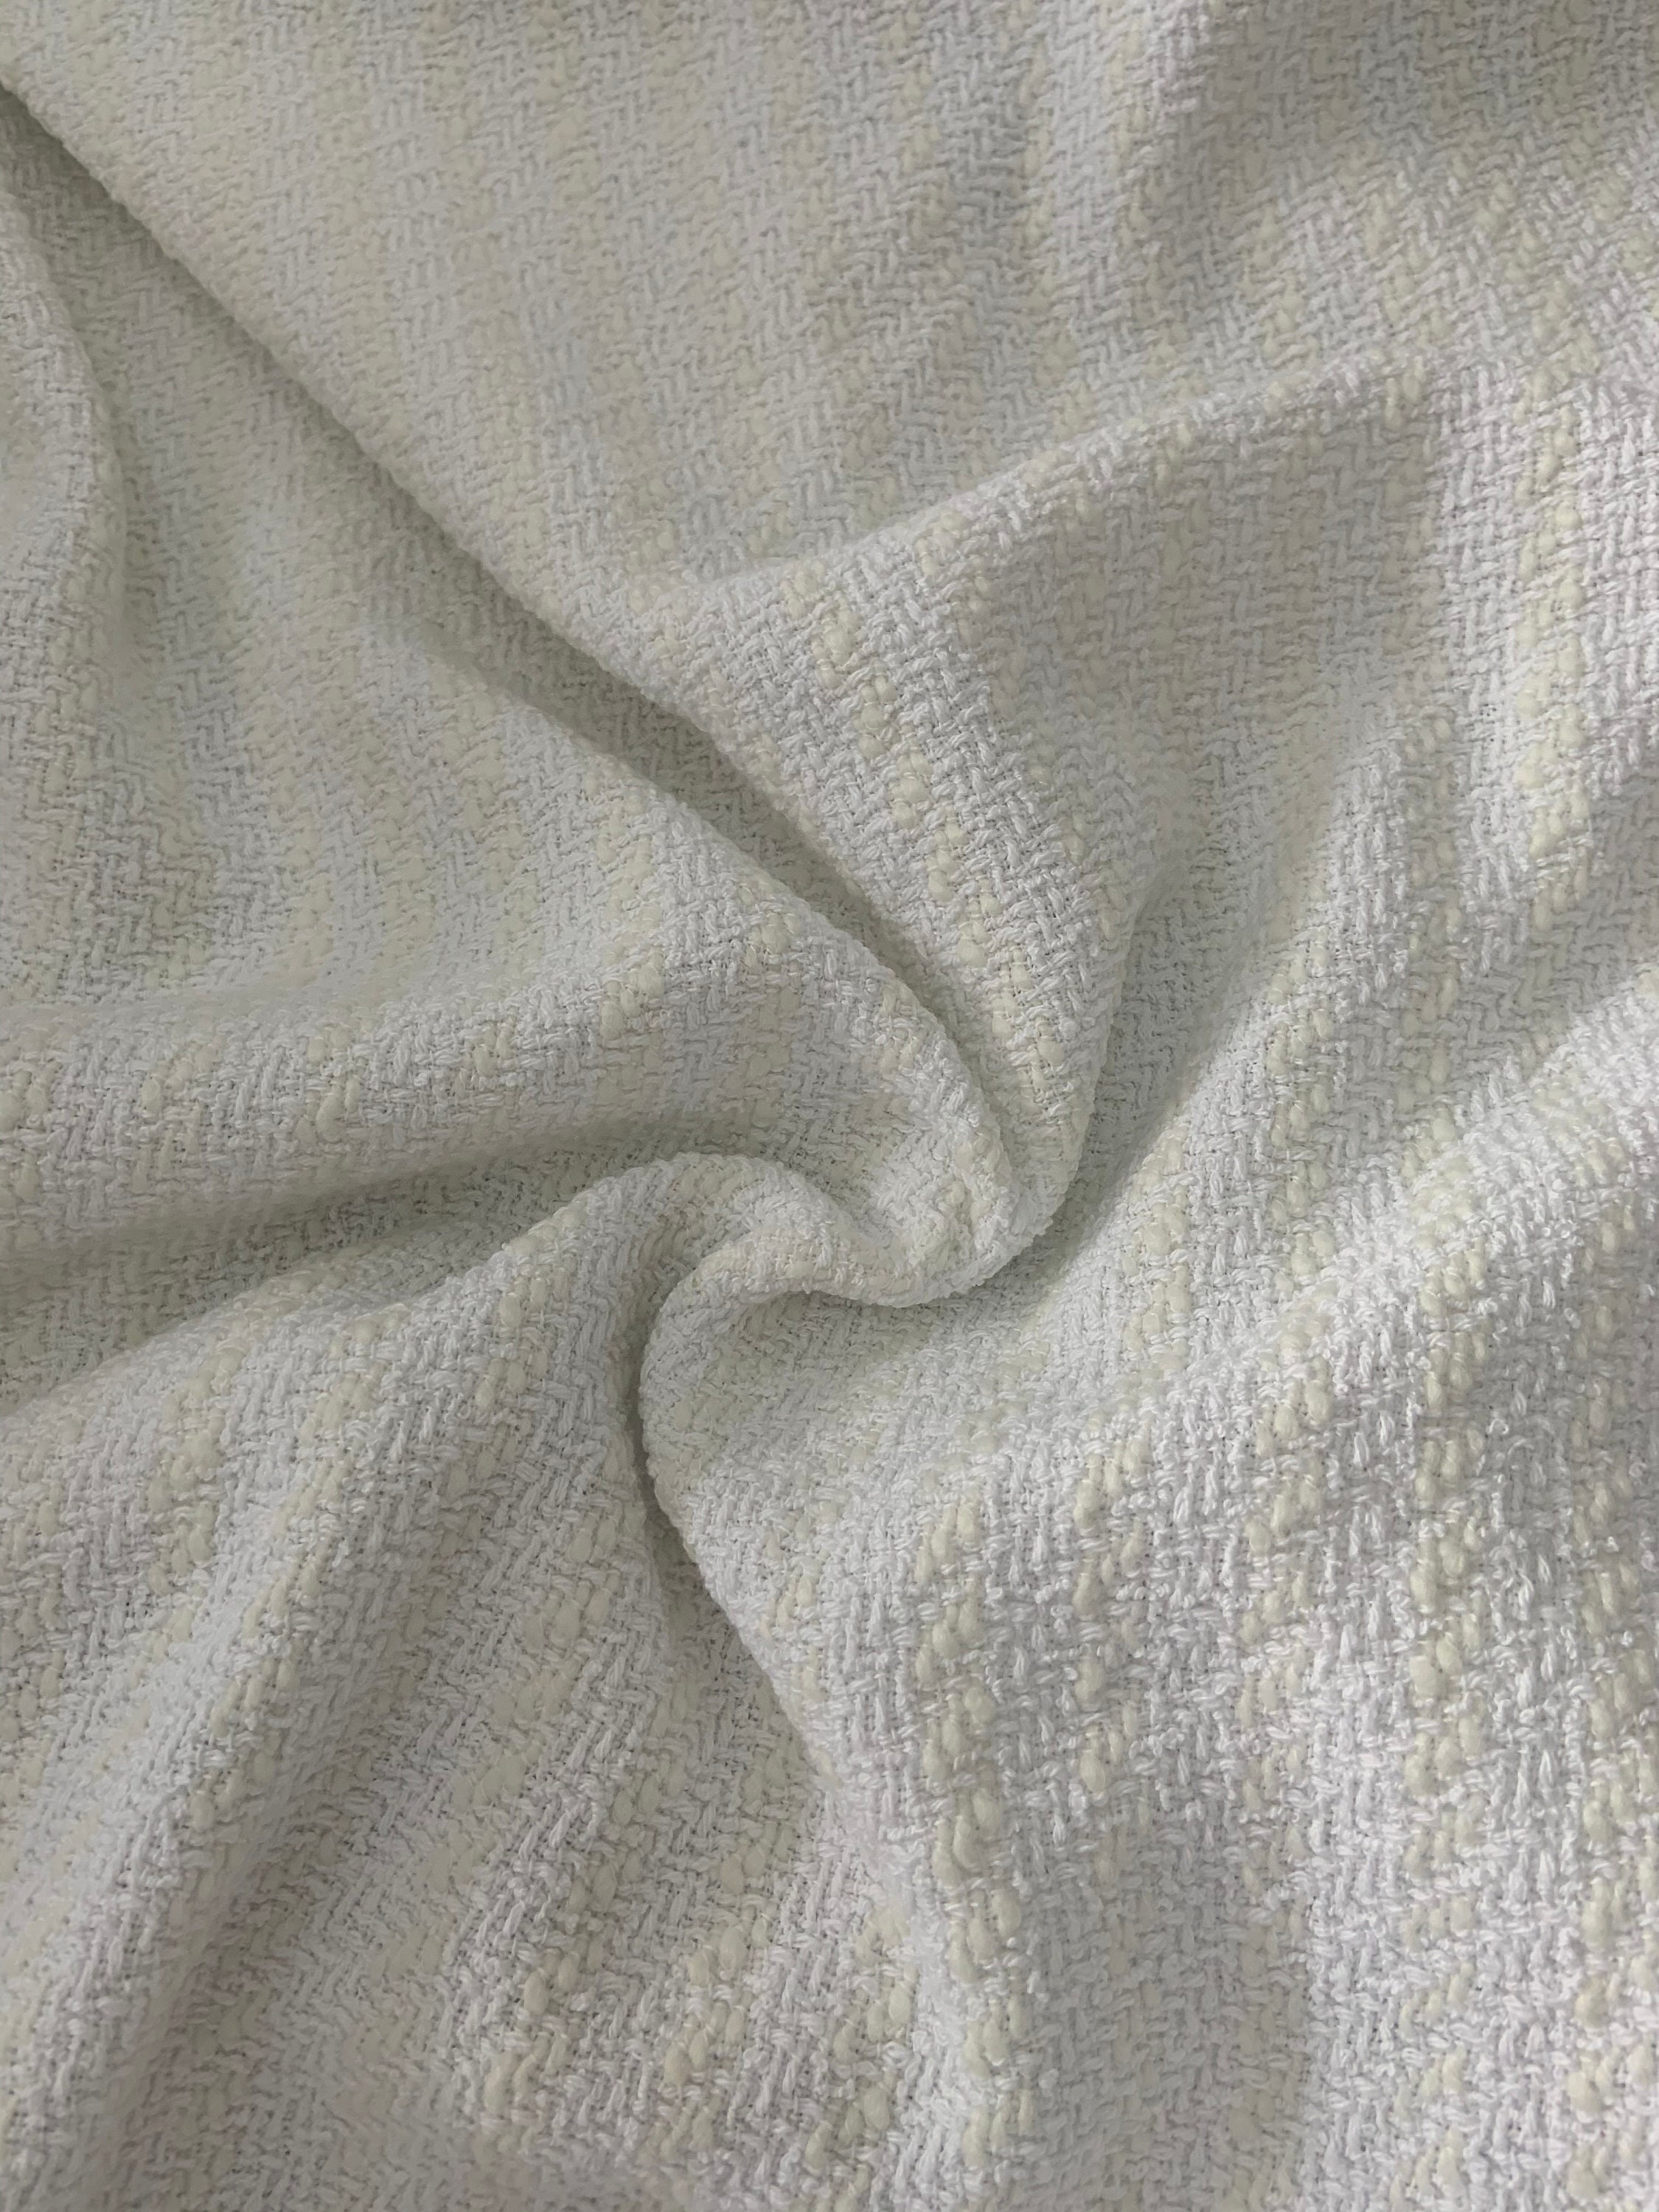  Weaving Chanel Style Linen Blends Cotton Fabric, Light Khaki  and Silver Color, 61 Width, Sewing for Coat, Jacket, Suits, Craft by The  Yard : Arts, Crafts & Sewing